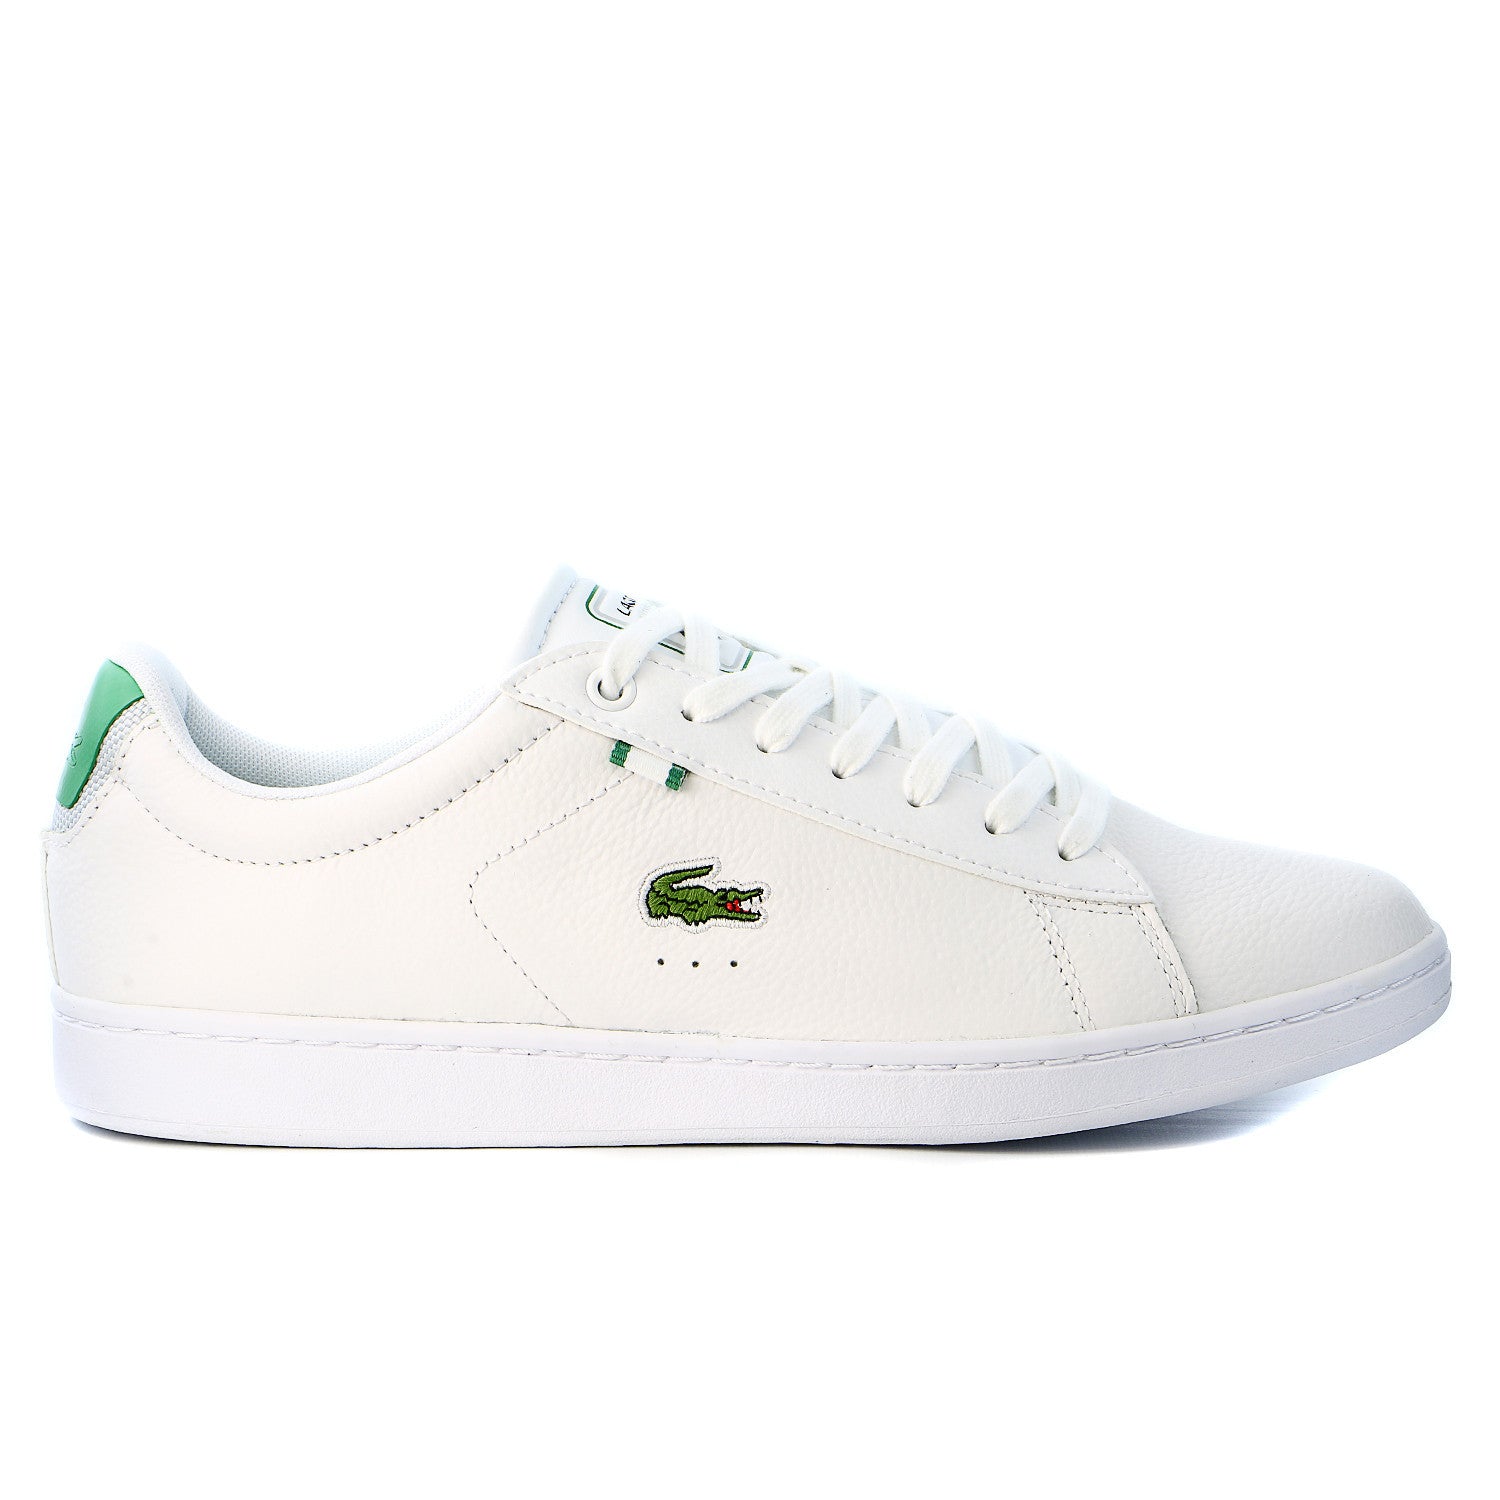 Lacoste Powercourt 2.0 123 1 Mens White Leather Lifestyle Sneakers Sho -  Ruze Shoes